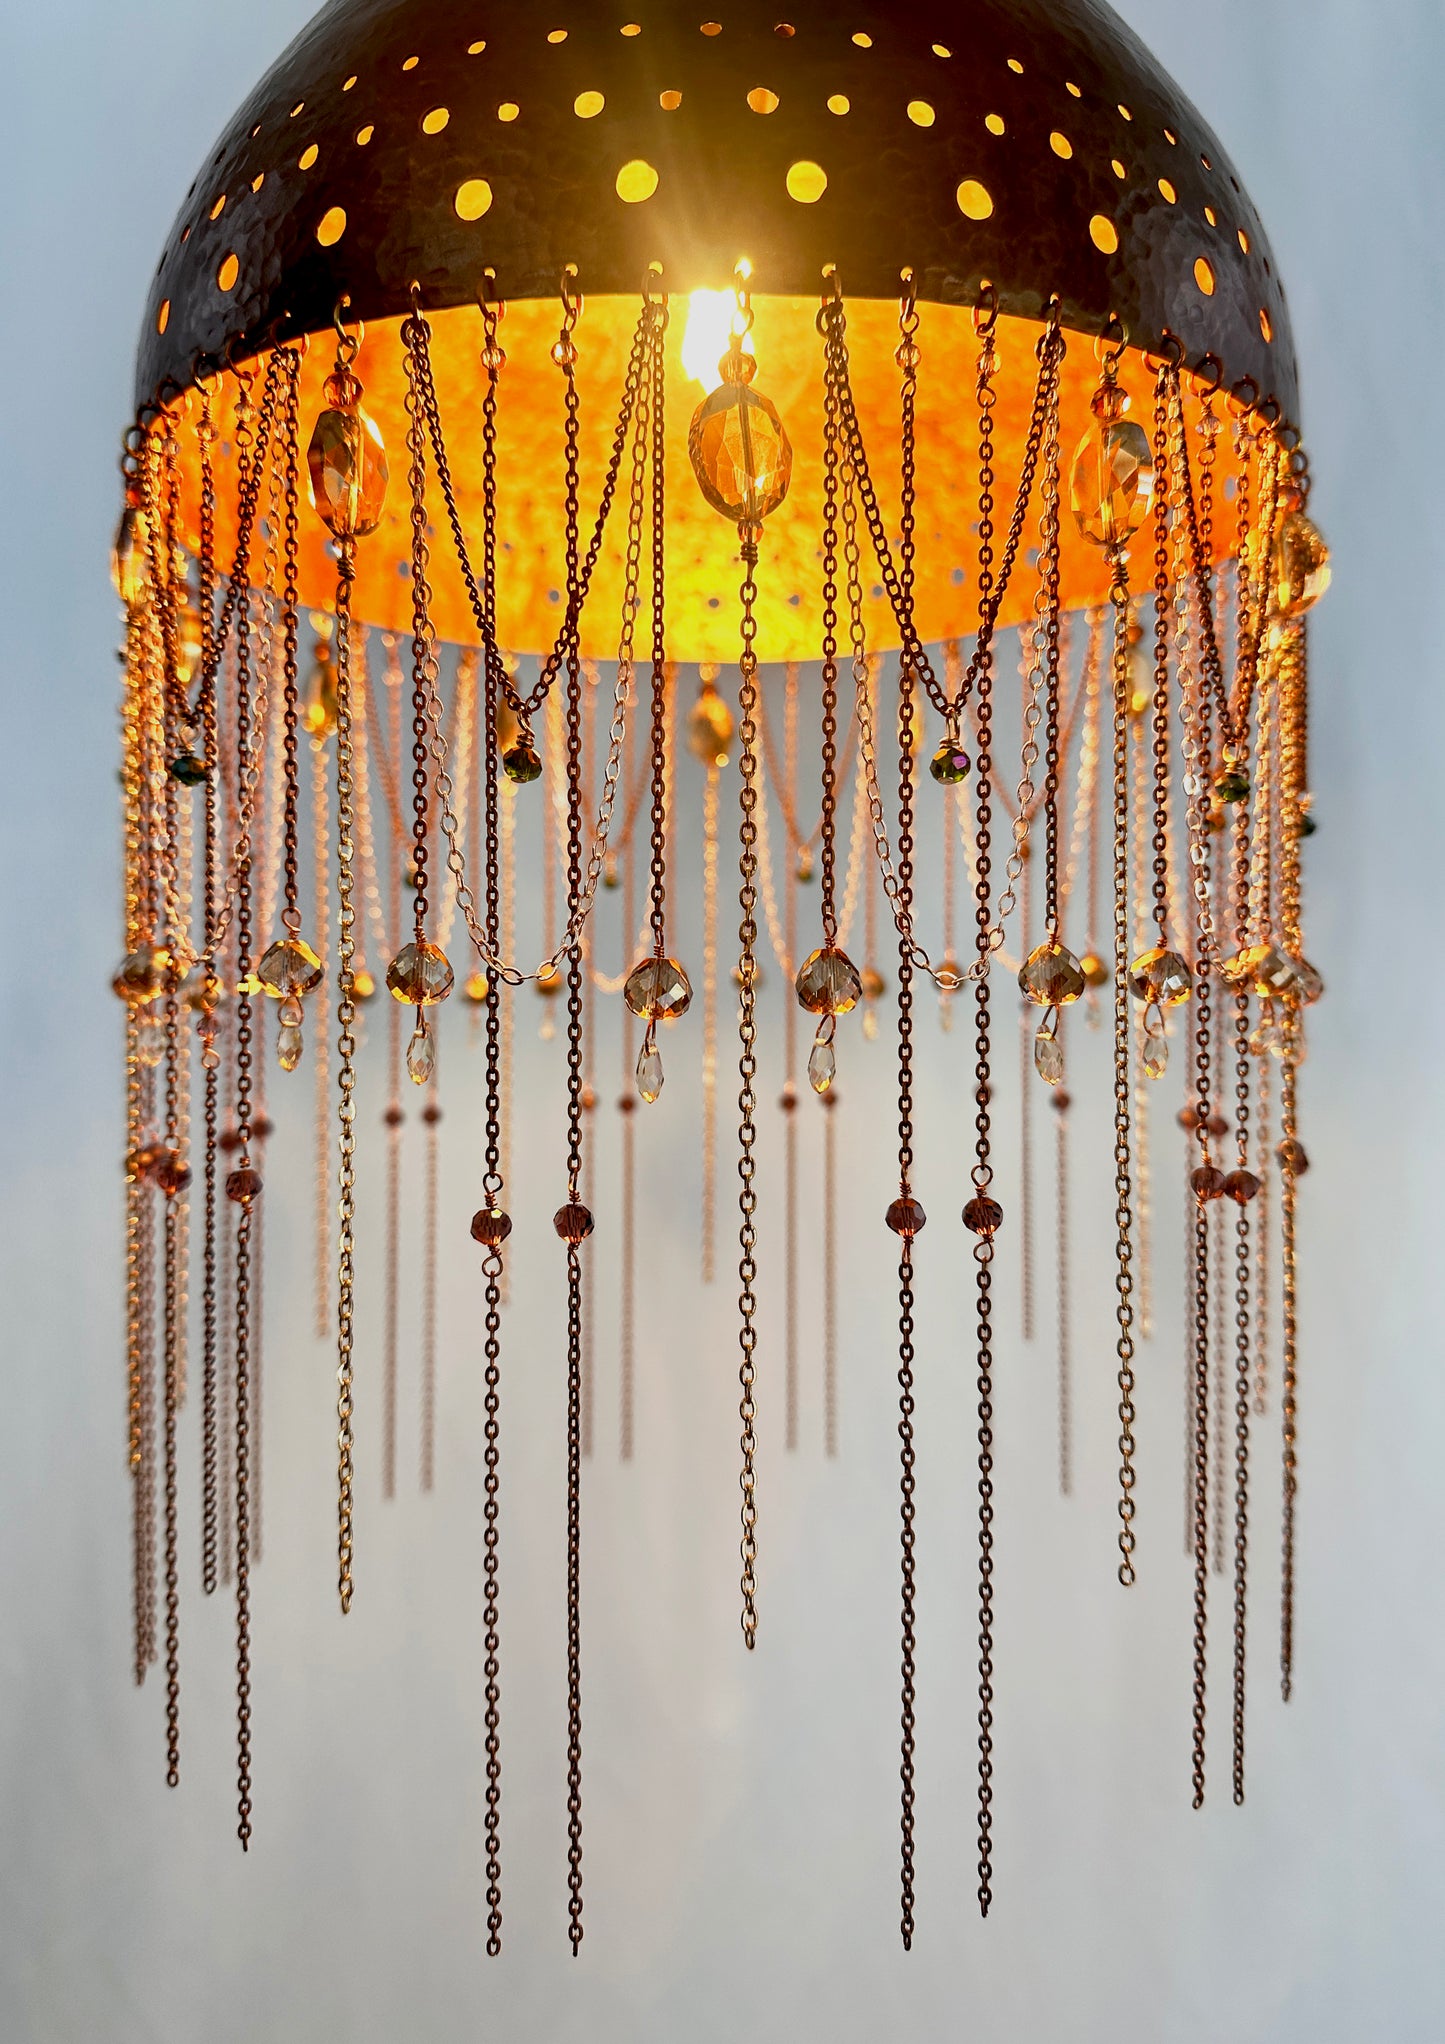 Red-Brown Shadow-Casting Crystal Pendant Lamp